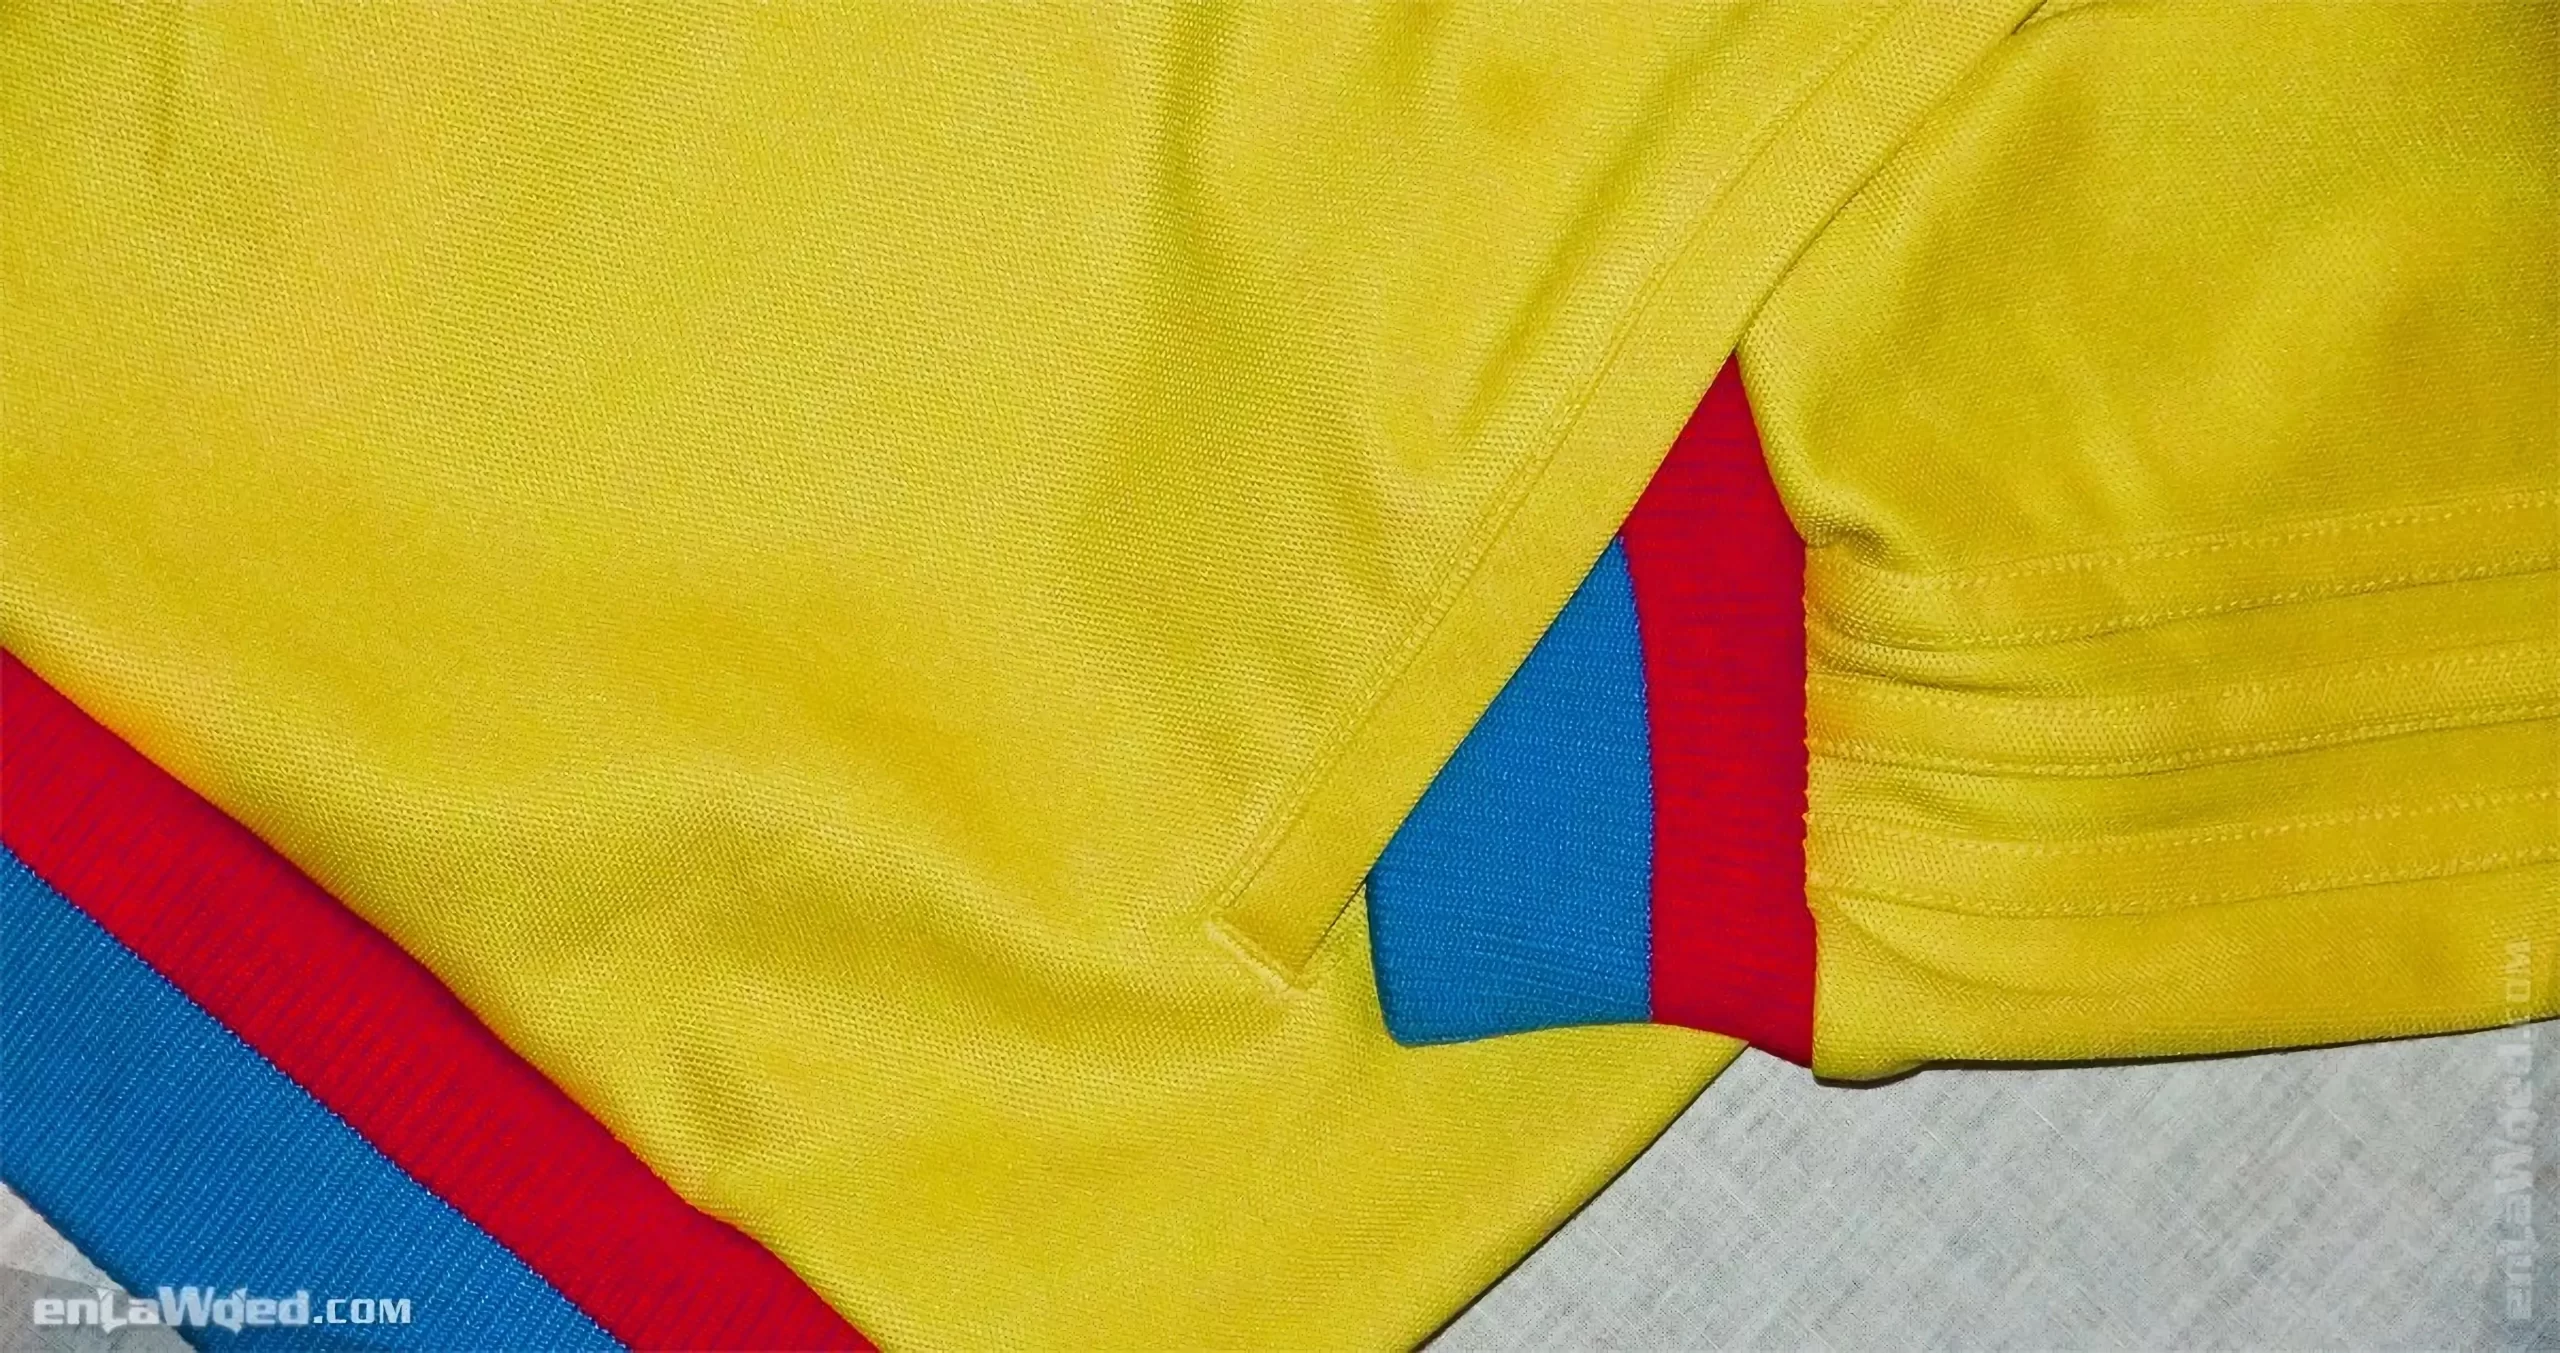 6th interior view of the Adidas Originals Colombia Track Top